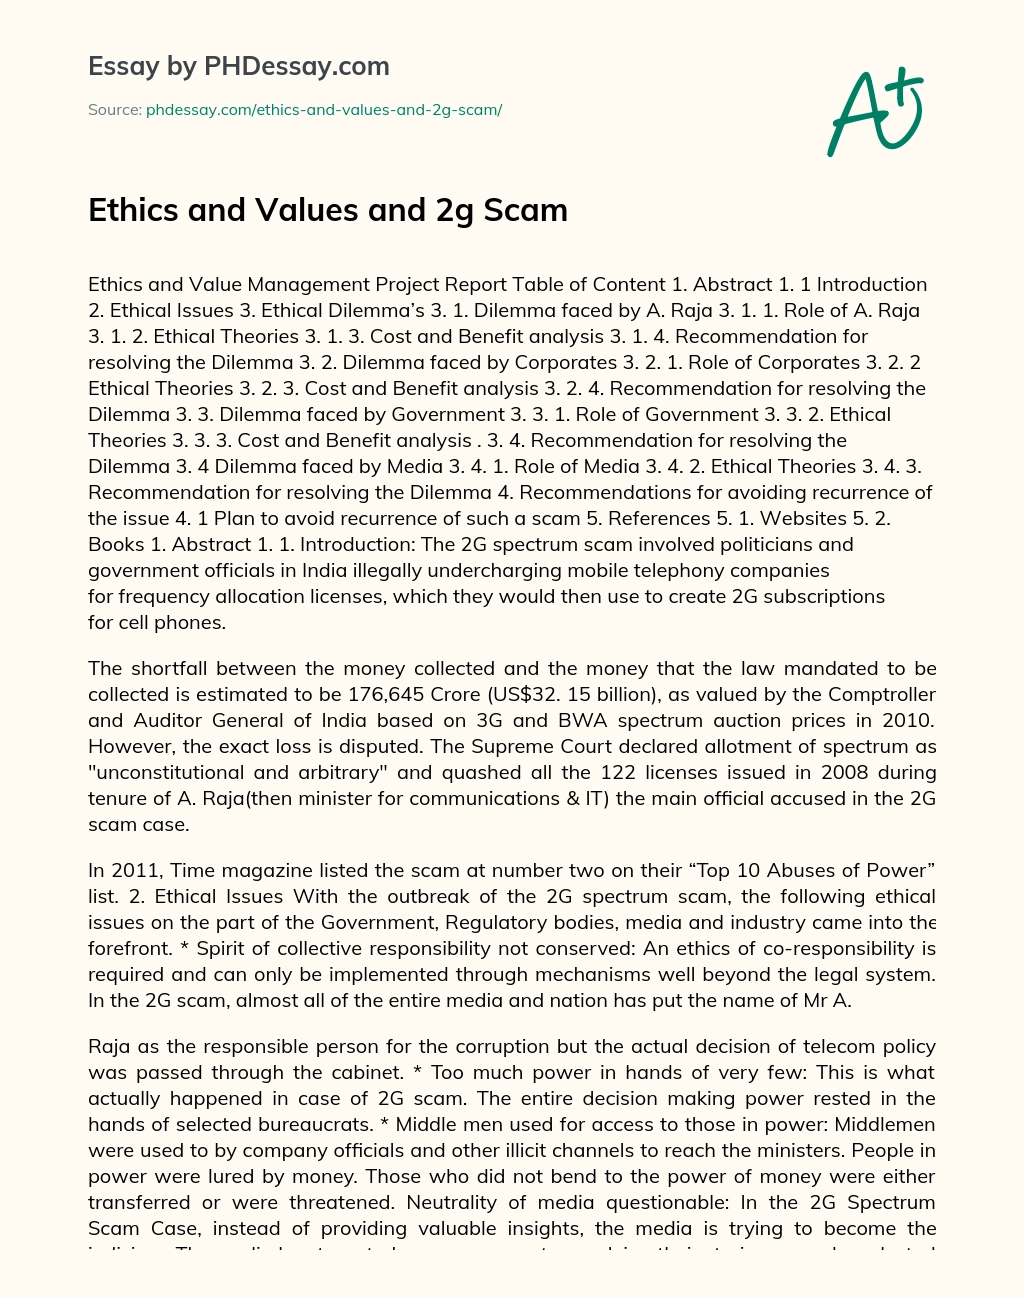 Ethics and Values and 2G Scam essay